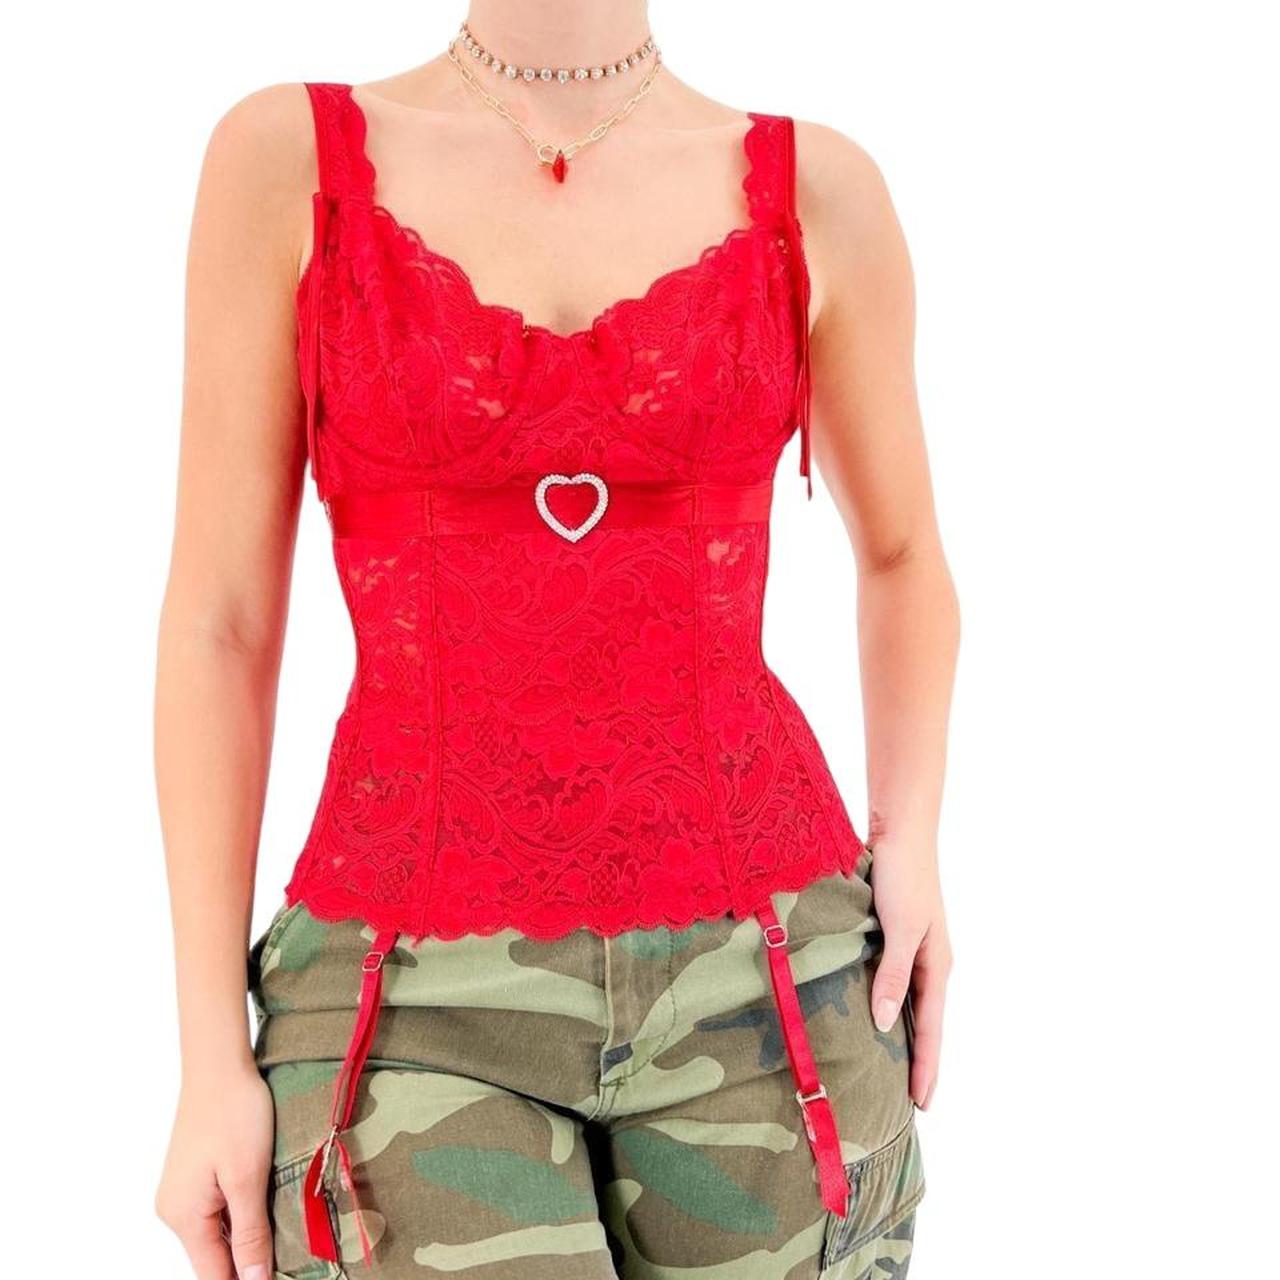 Y2k Vintage Fredericks of Hollywood Red Floral Lace Bustier Top w/ Heart Sequins [S]